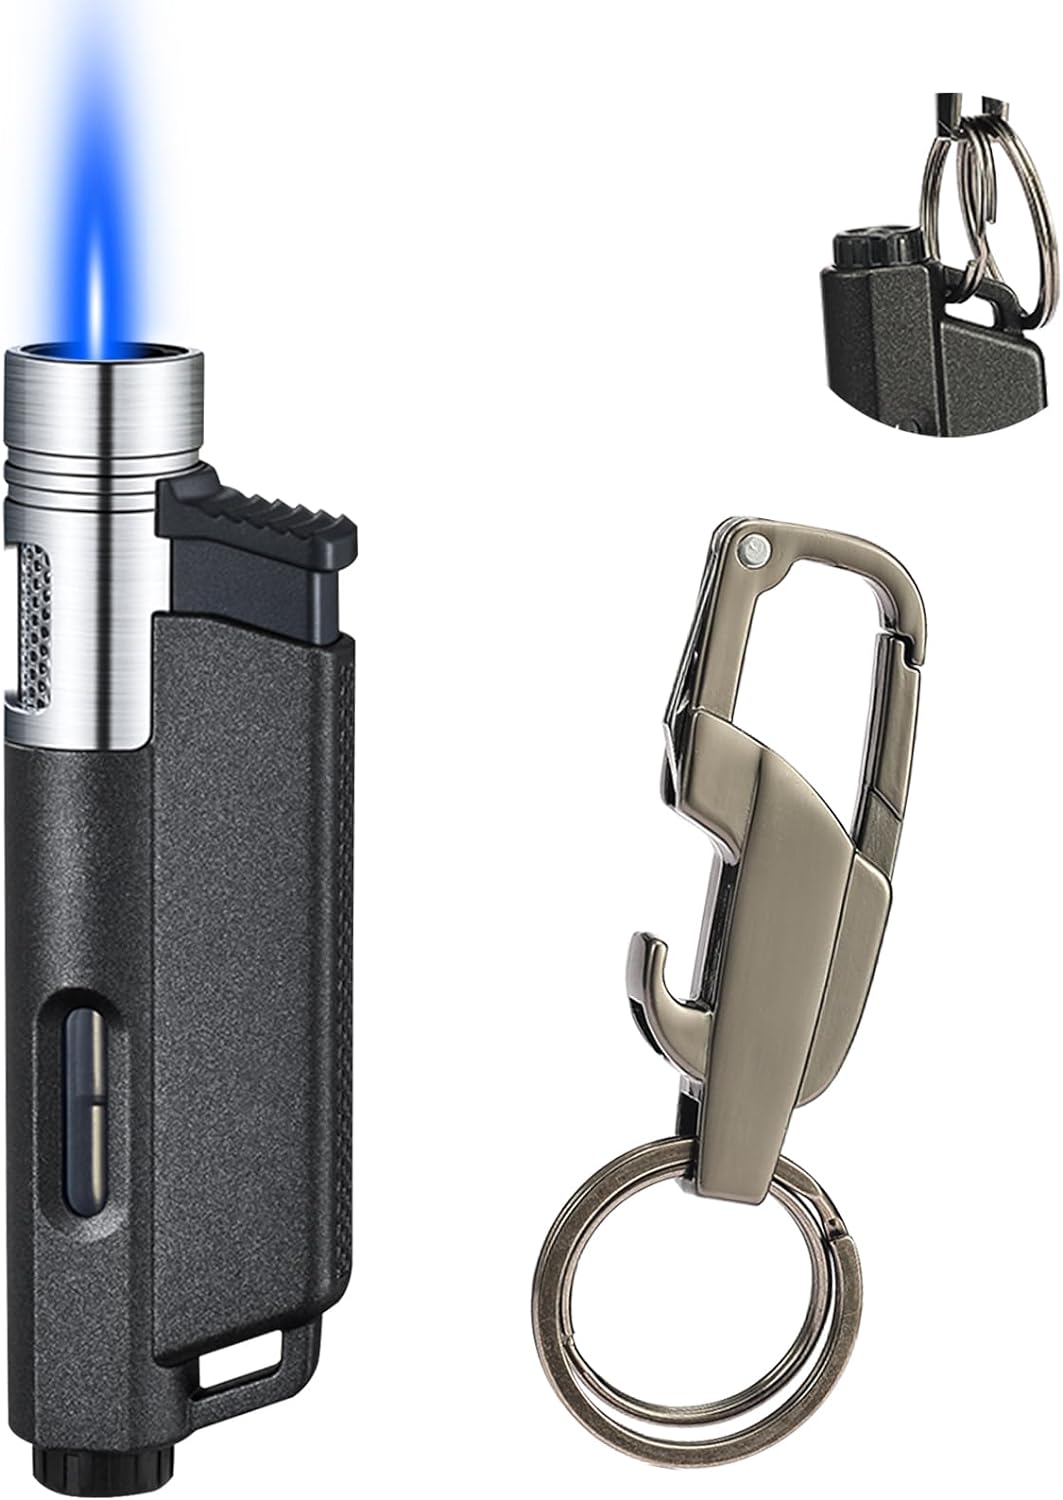 Bbsisgo Torch Lighter and Keychain Combo, Adjustable Jet Flame Butane Lighter, Refillable Keychain Lighter, Black.(Gas Not Included)